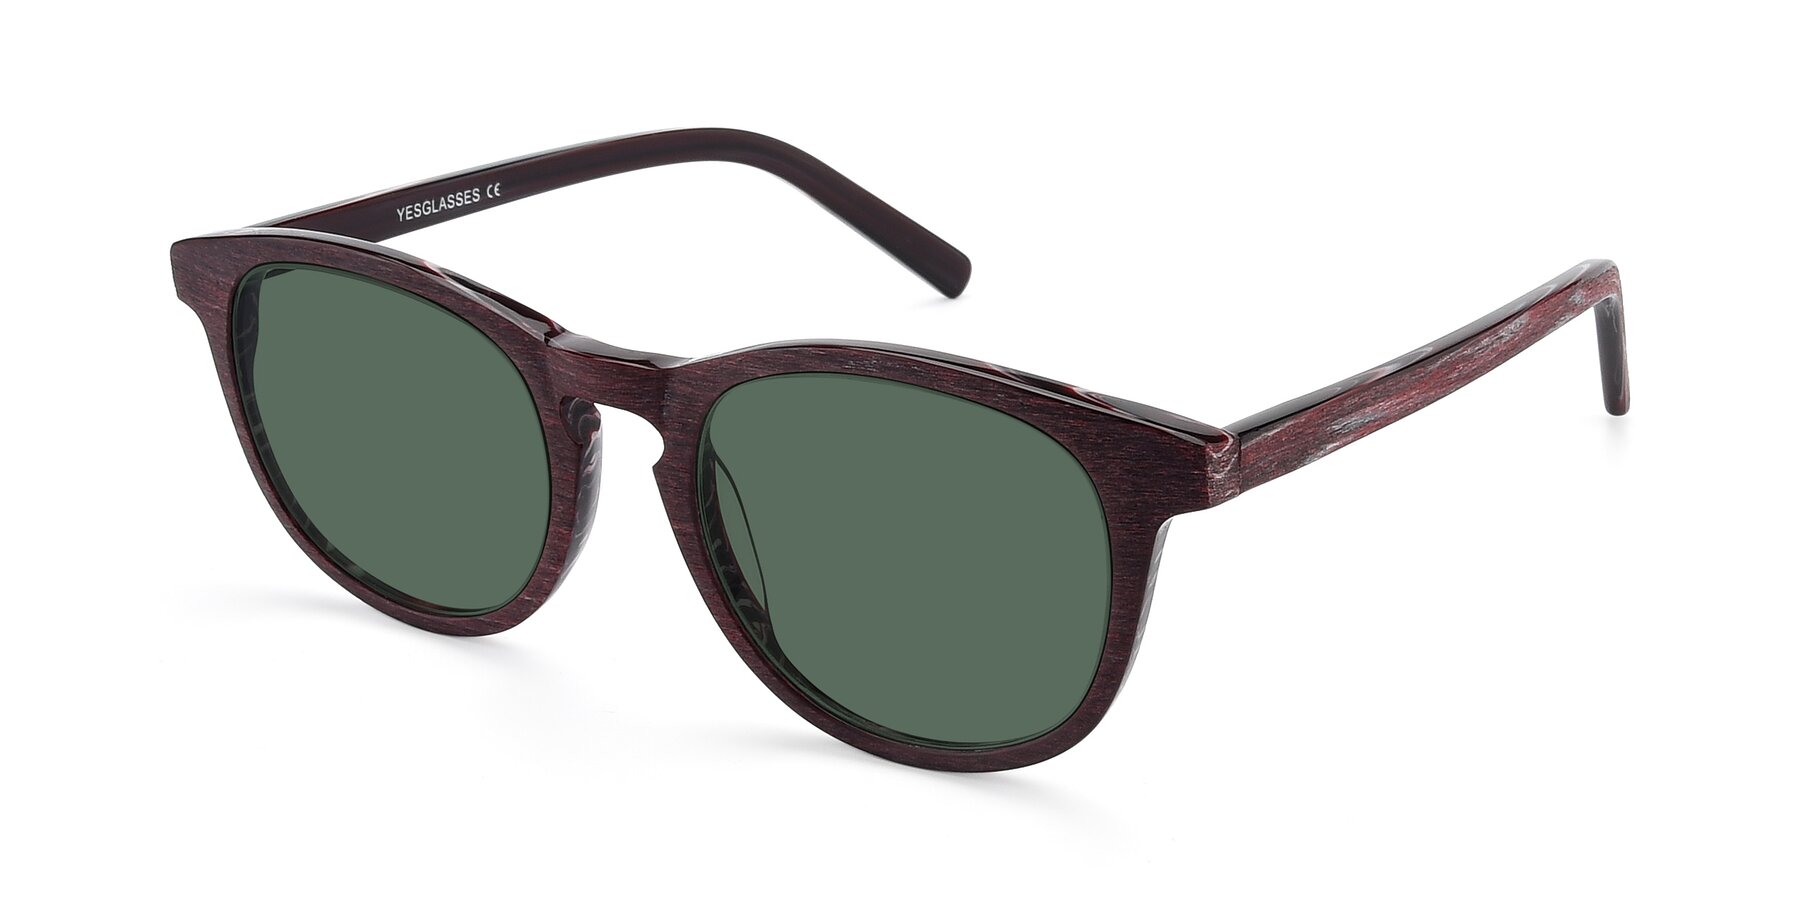 Angle of SR6044 in Wine-Wooden with Green Polarized Lenses